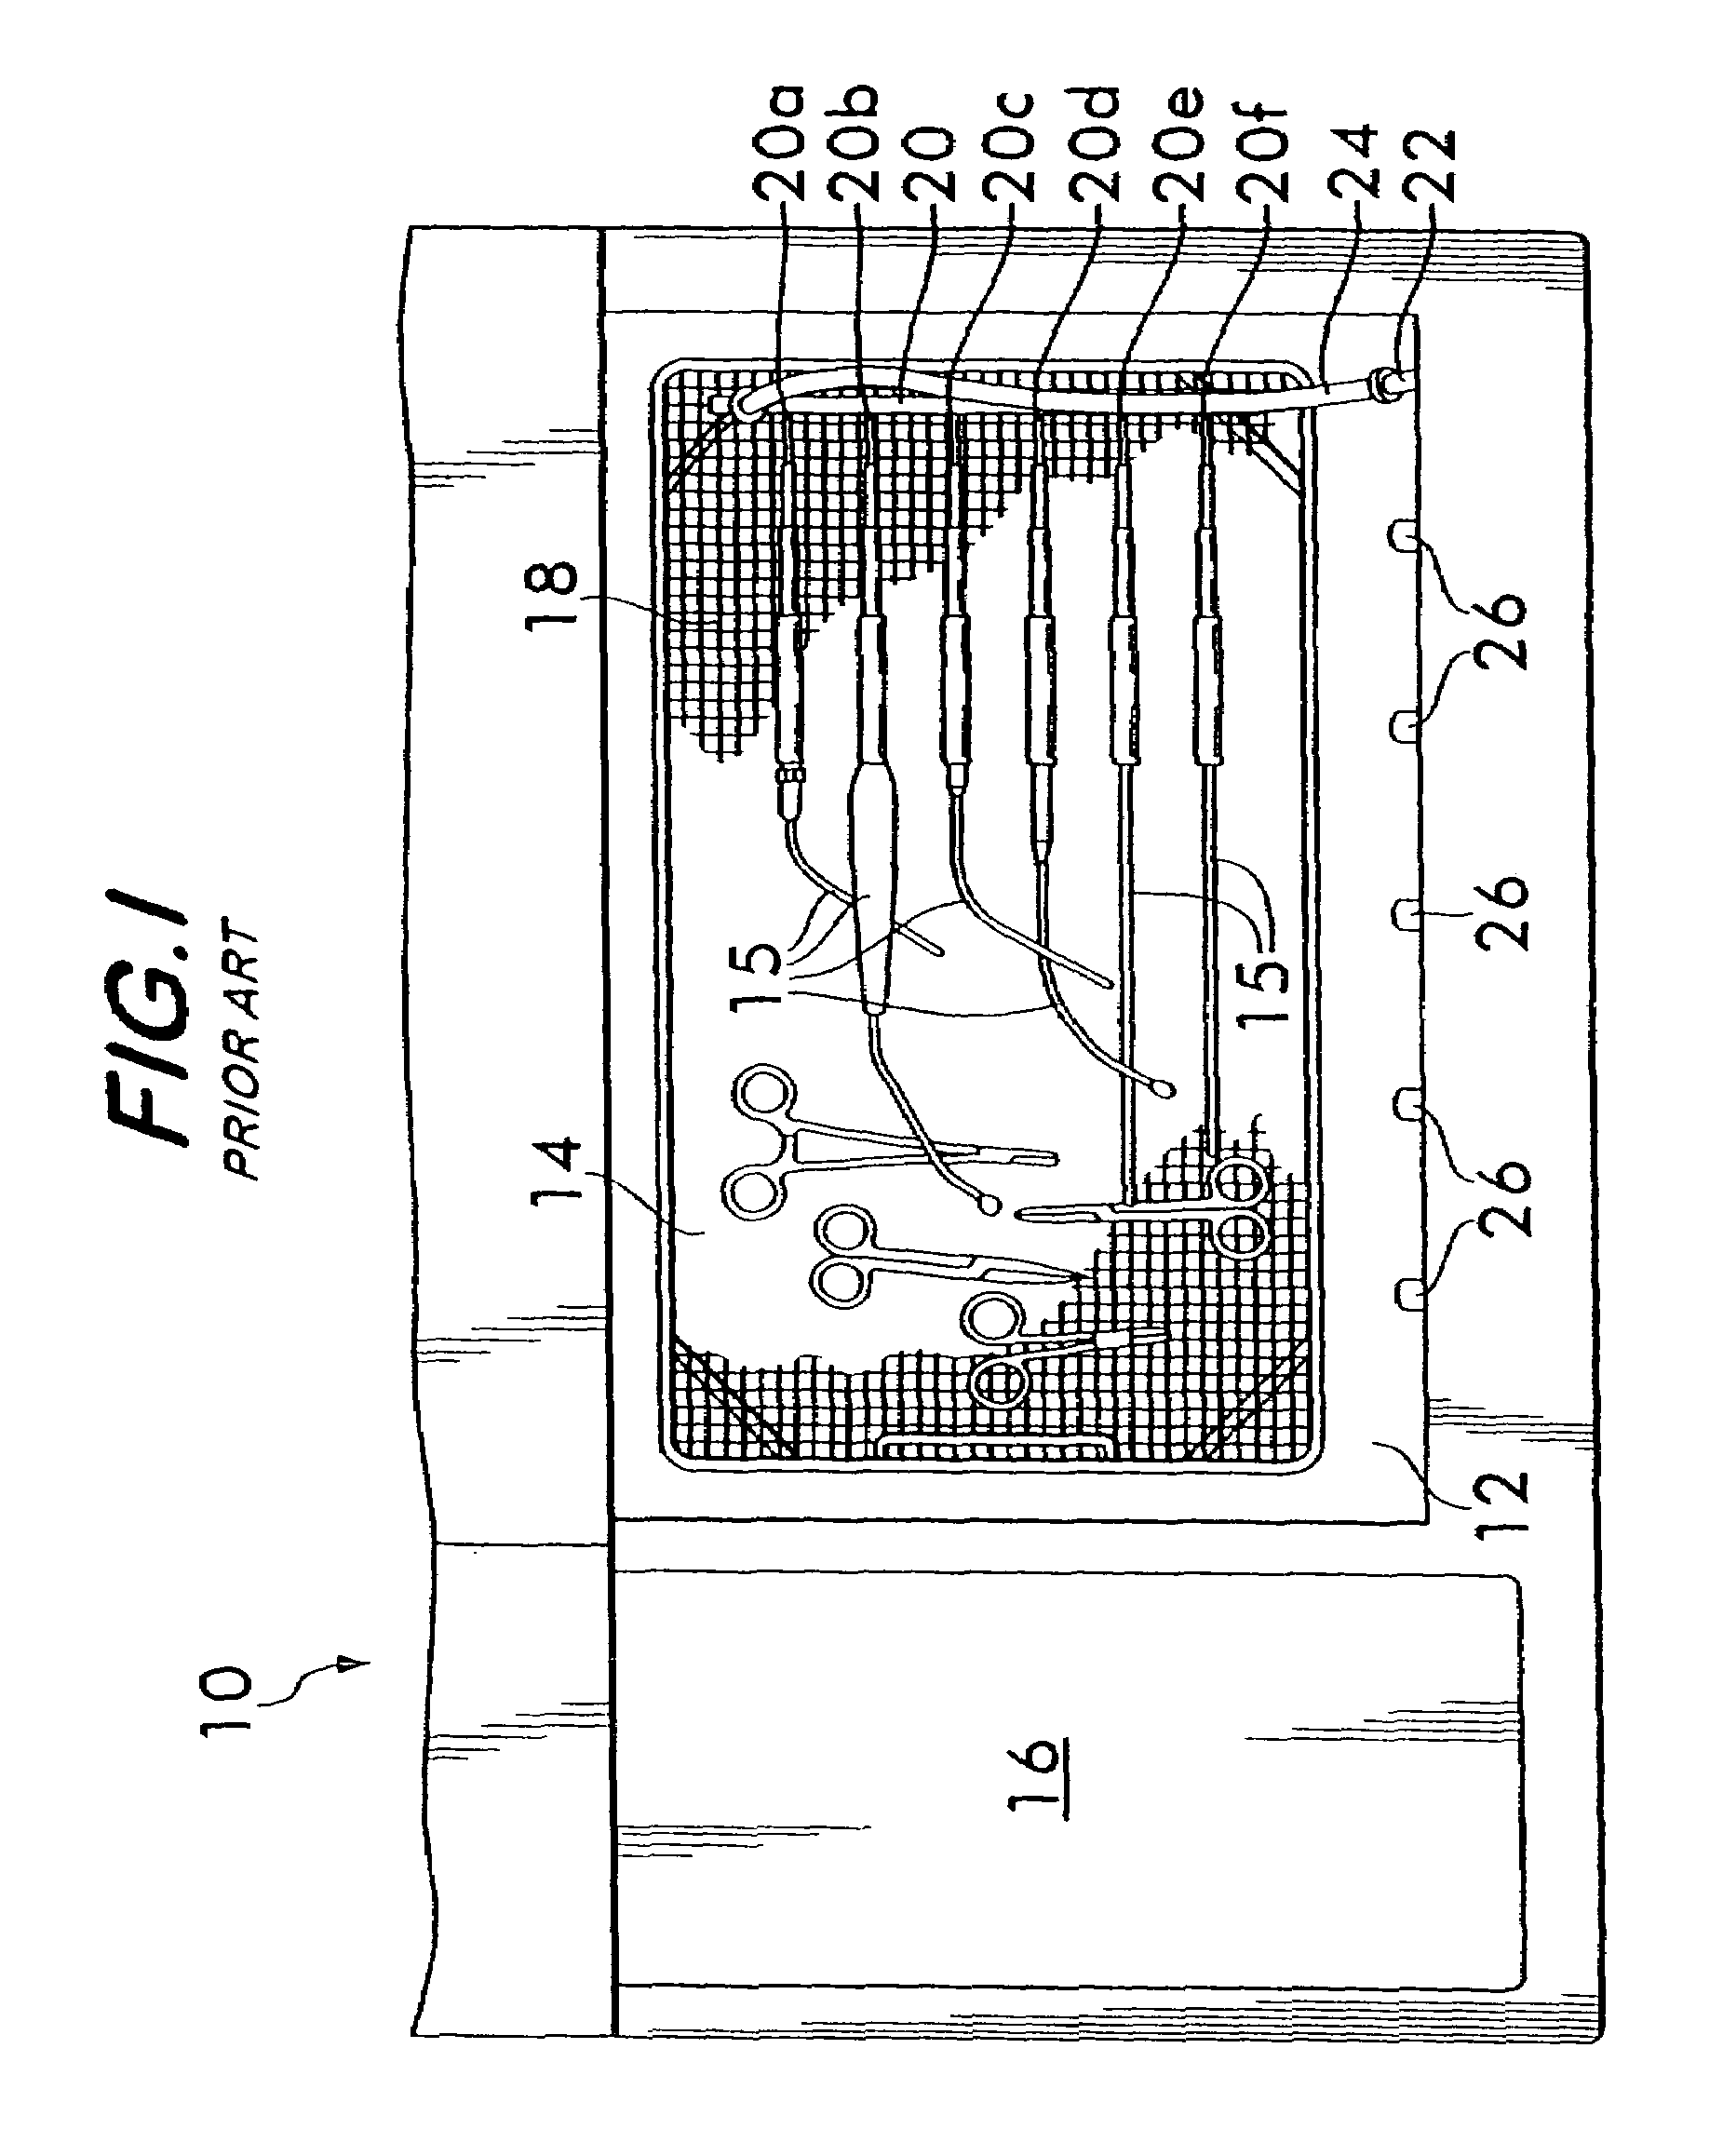 Portable chemical transfer/neutralizing containment system